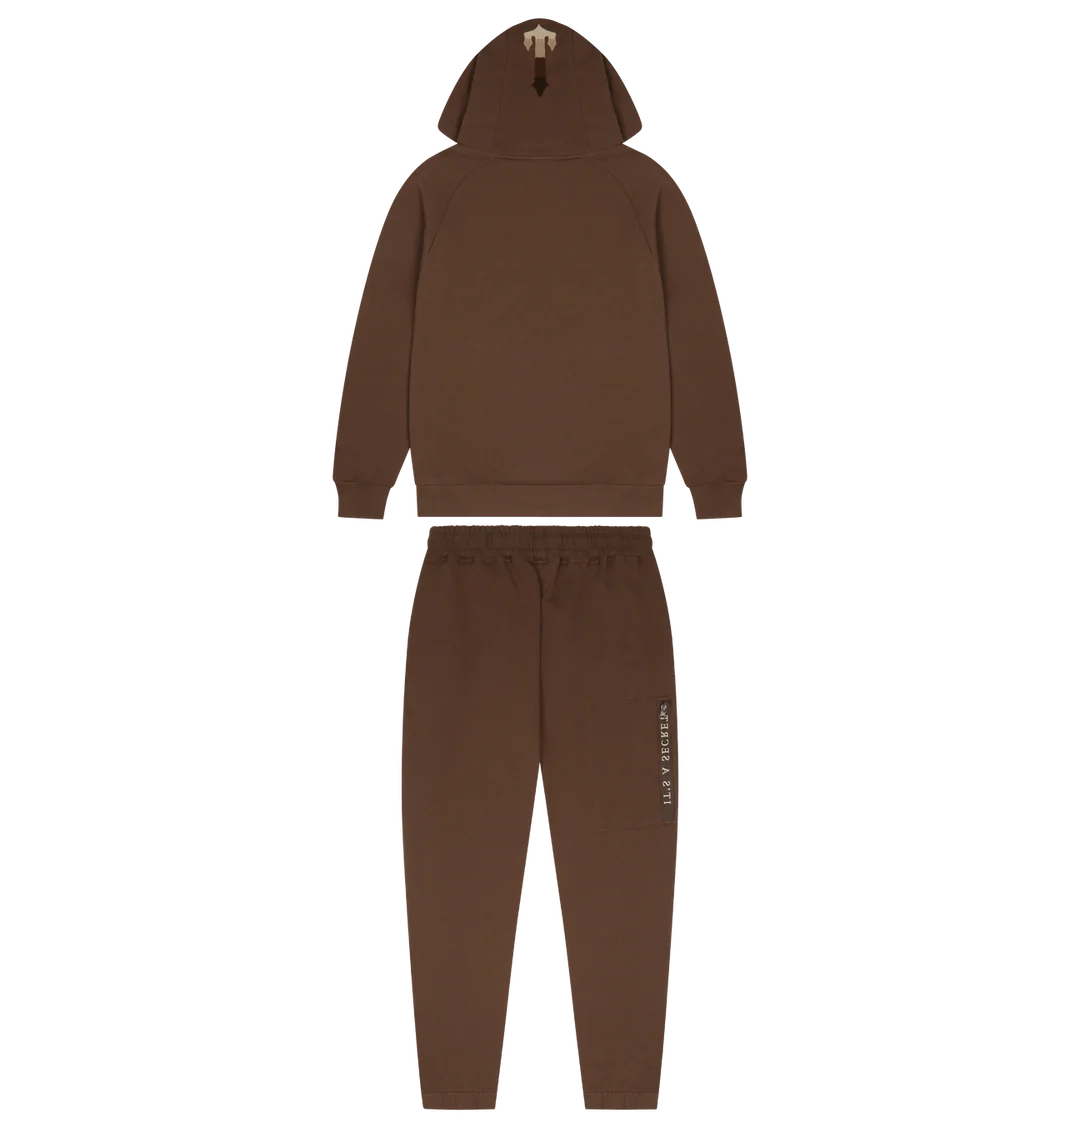 Trapstar Chenille Decoded 2.0 Hooded Tracksuit - Earth Edition